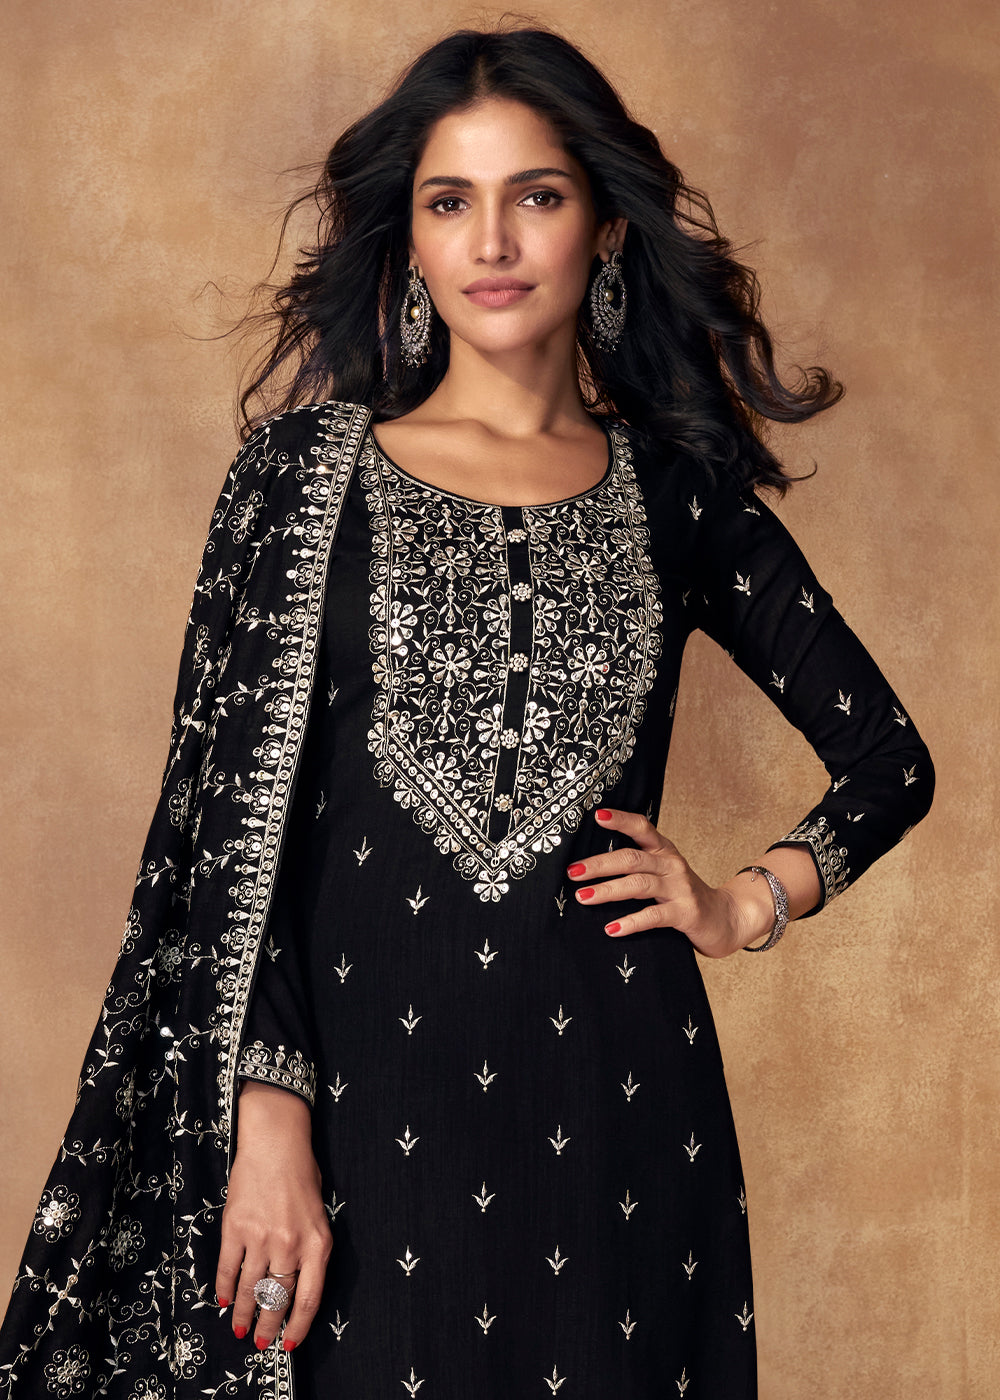 Raven Black Silk Salwar Suit with Embroidery work